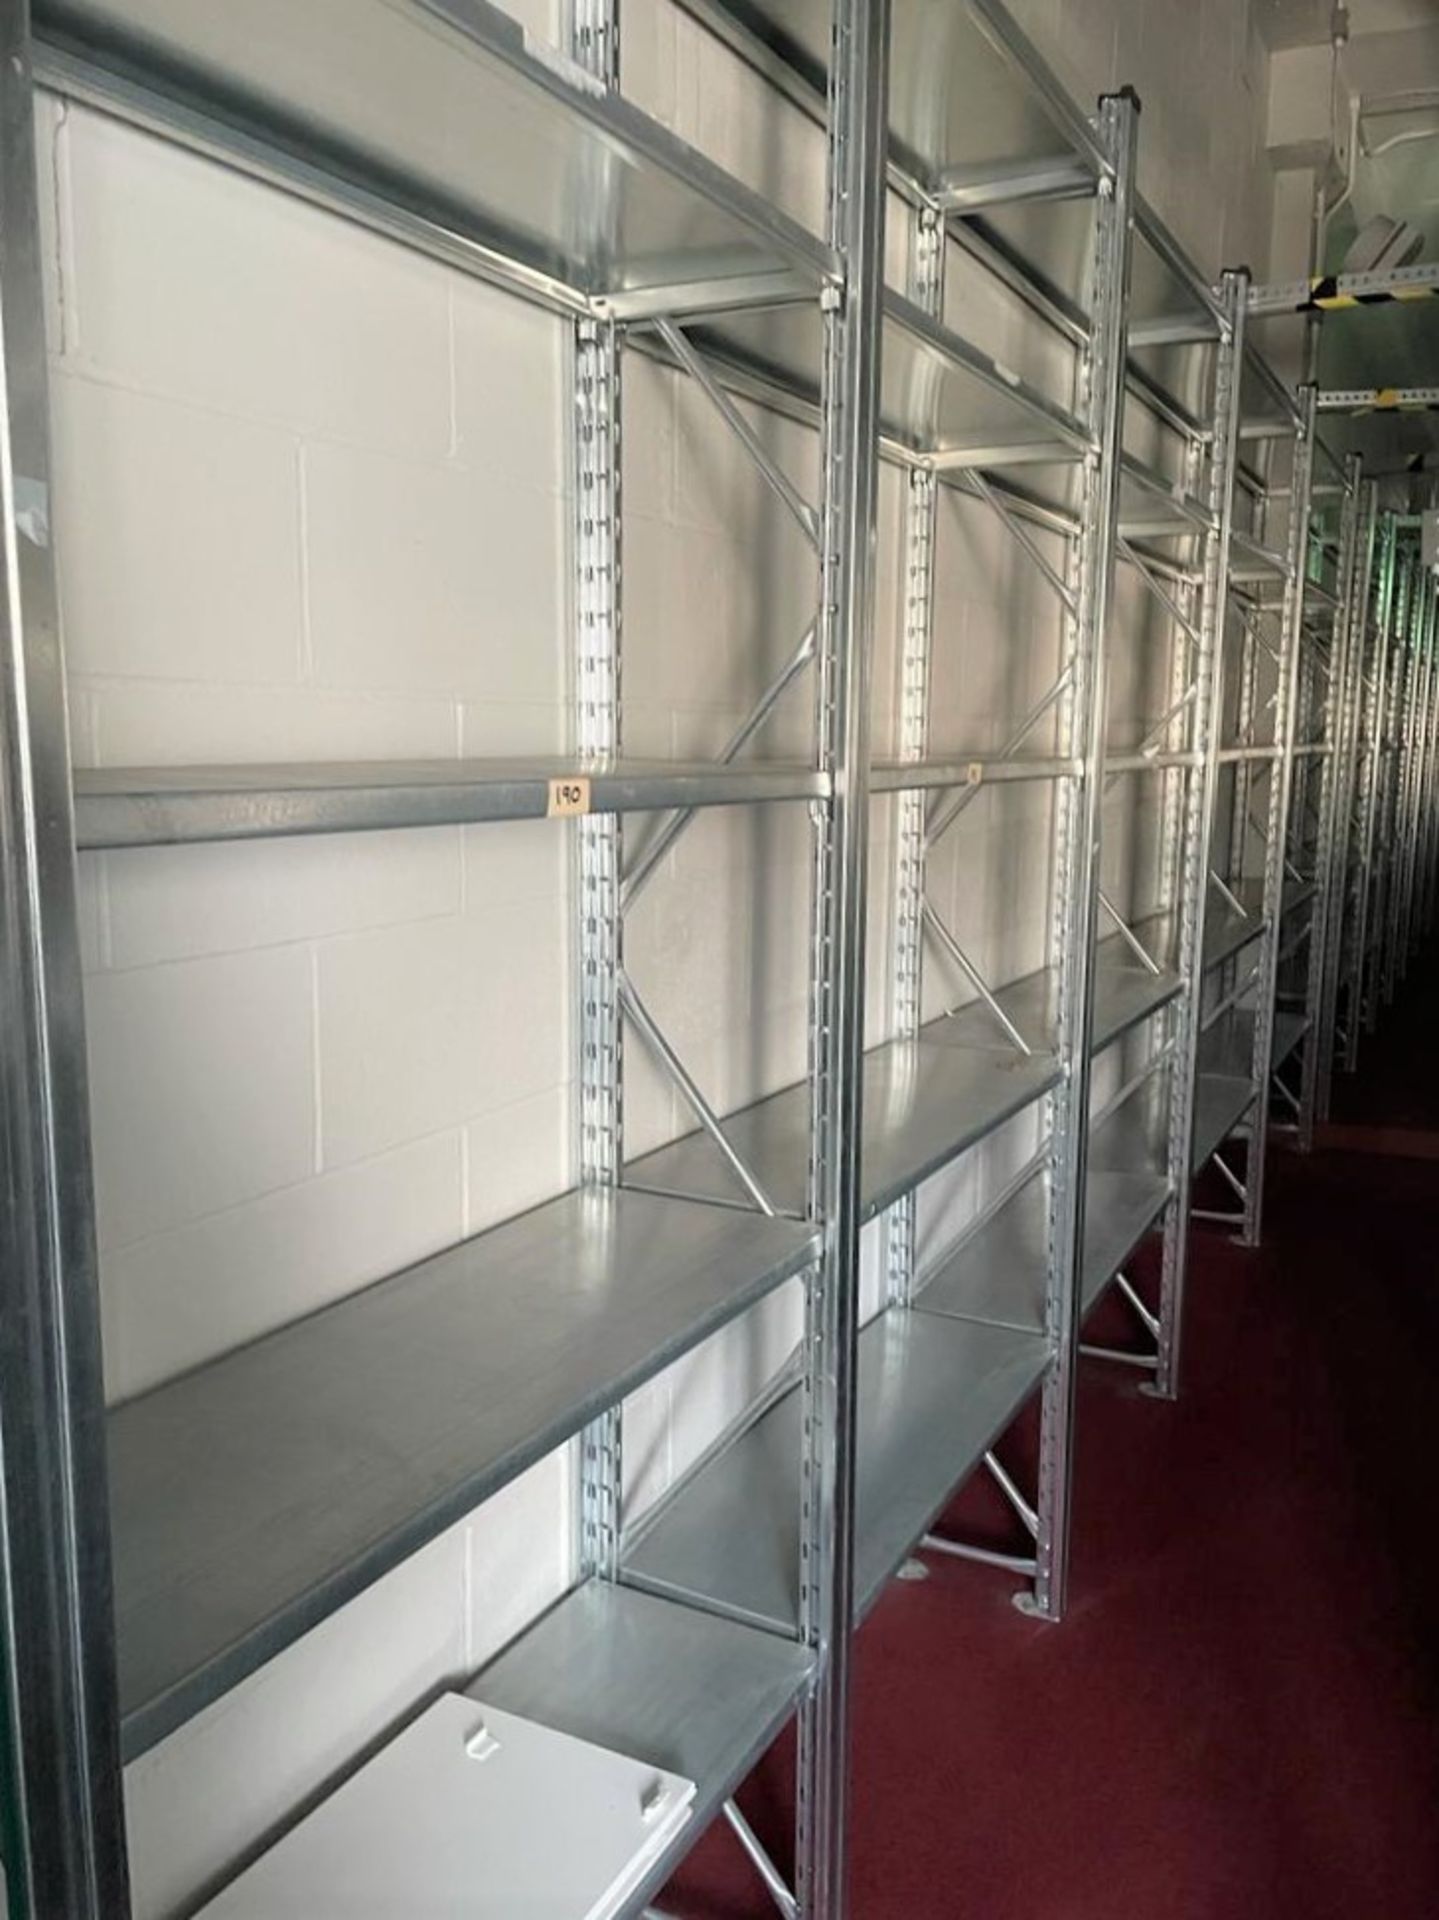 6 x Bays of High Quality Galvanised Steel Warehouse Shelving - Bay Dimensions: H250 x W100 x D30 cms